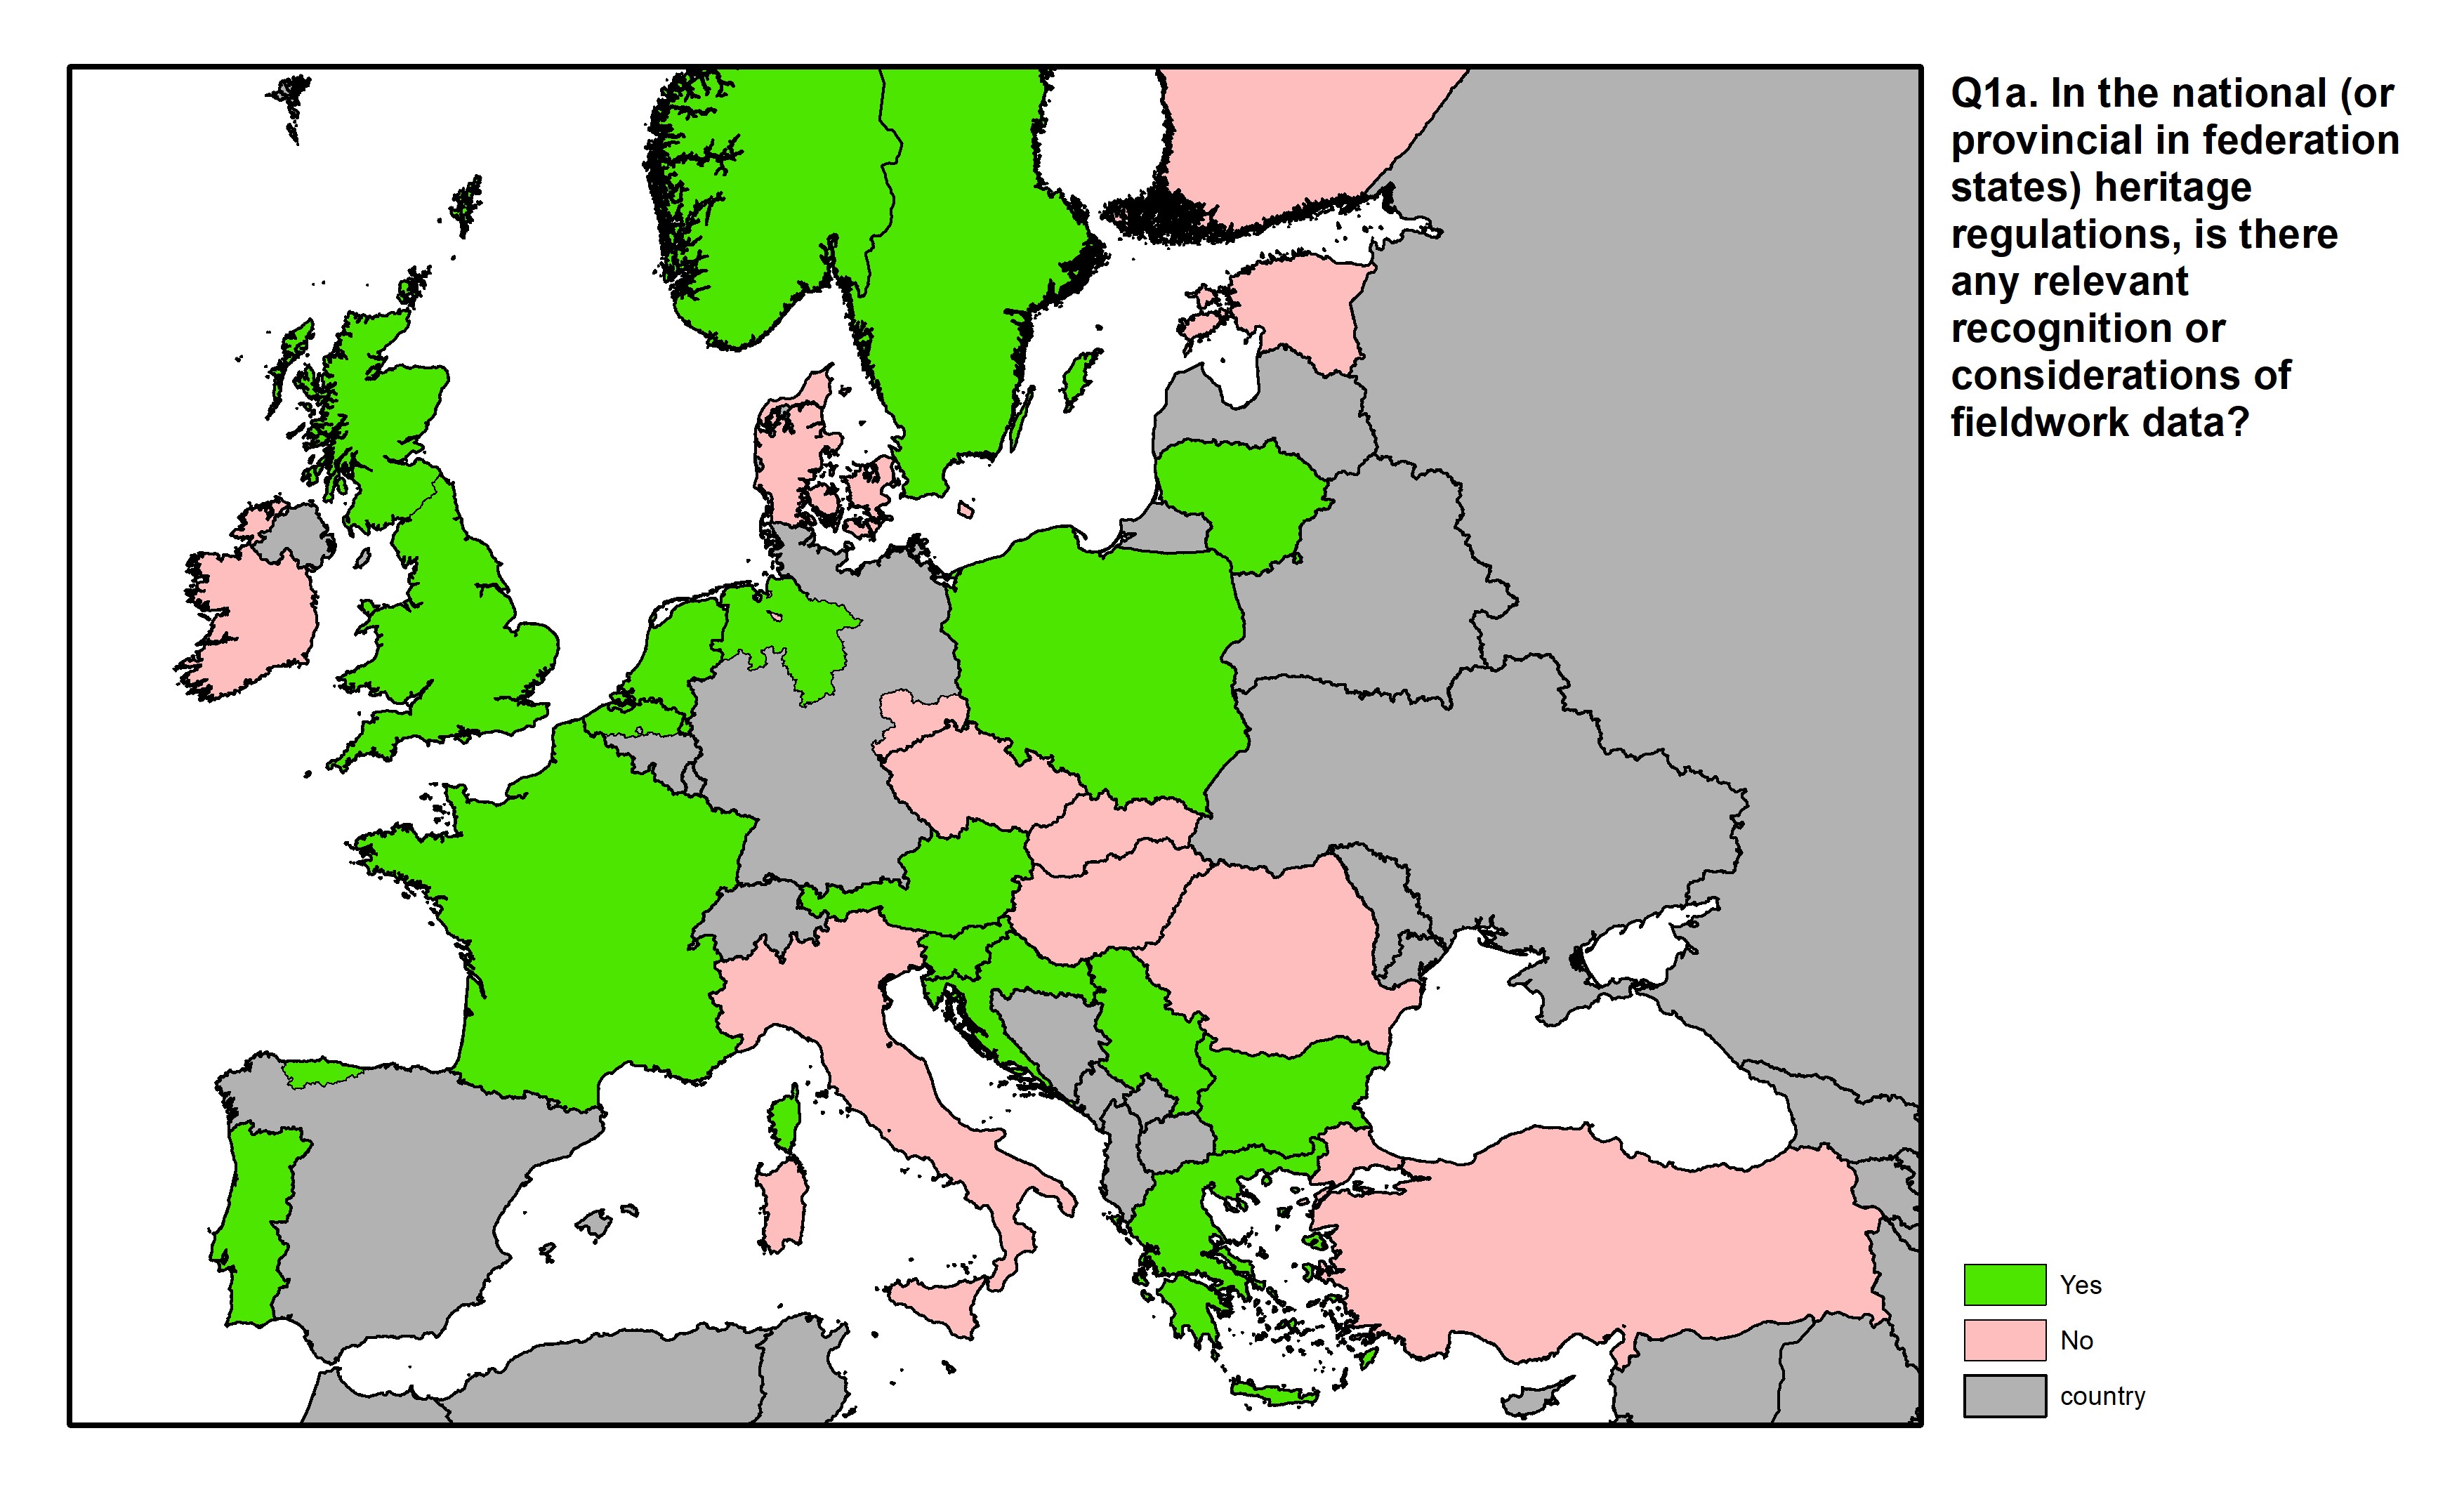 Figure 2: a map of Europe showing countries and regions in colour based on response rates to the survey question.